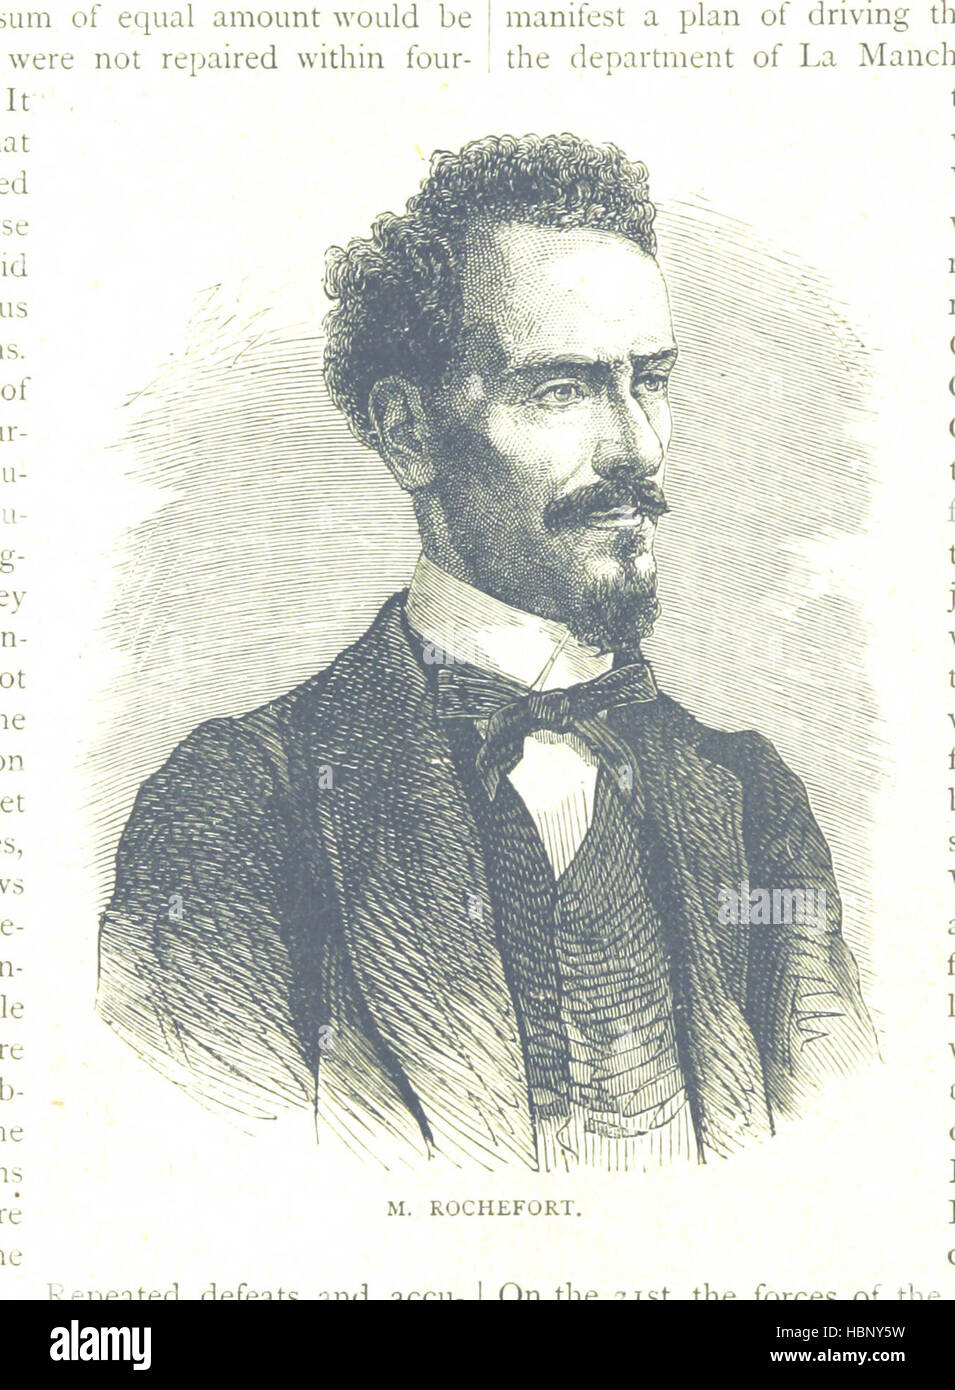 Image taken from page 184 of 'Cassell's History of the War between France and Germany. 1870-1871' Image taken from page 184 of 'Cassell's History of the Stock Photo